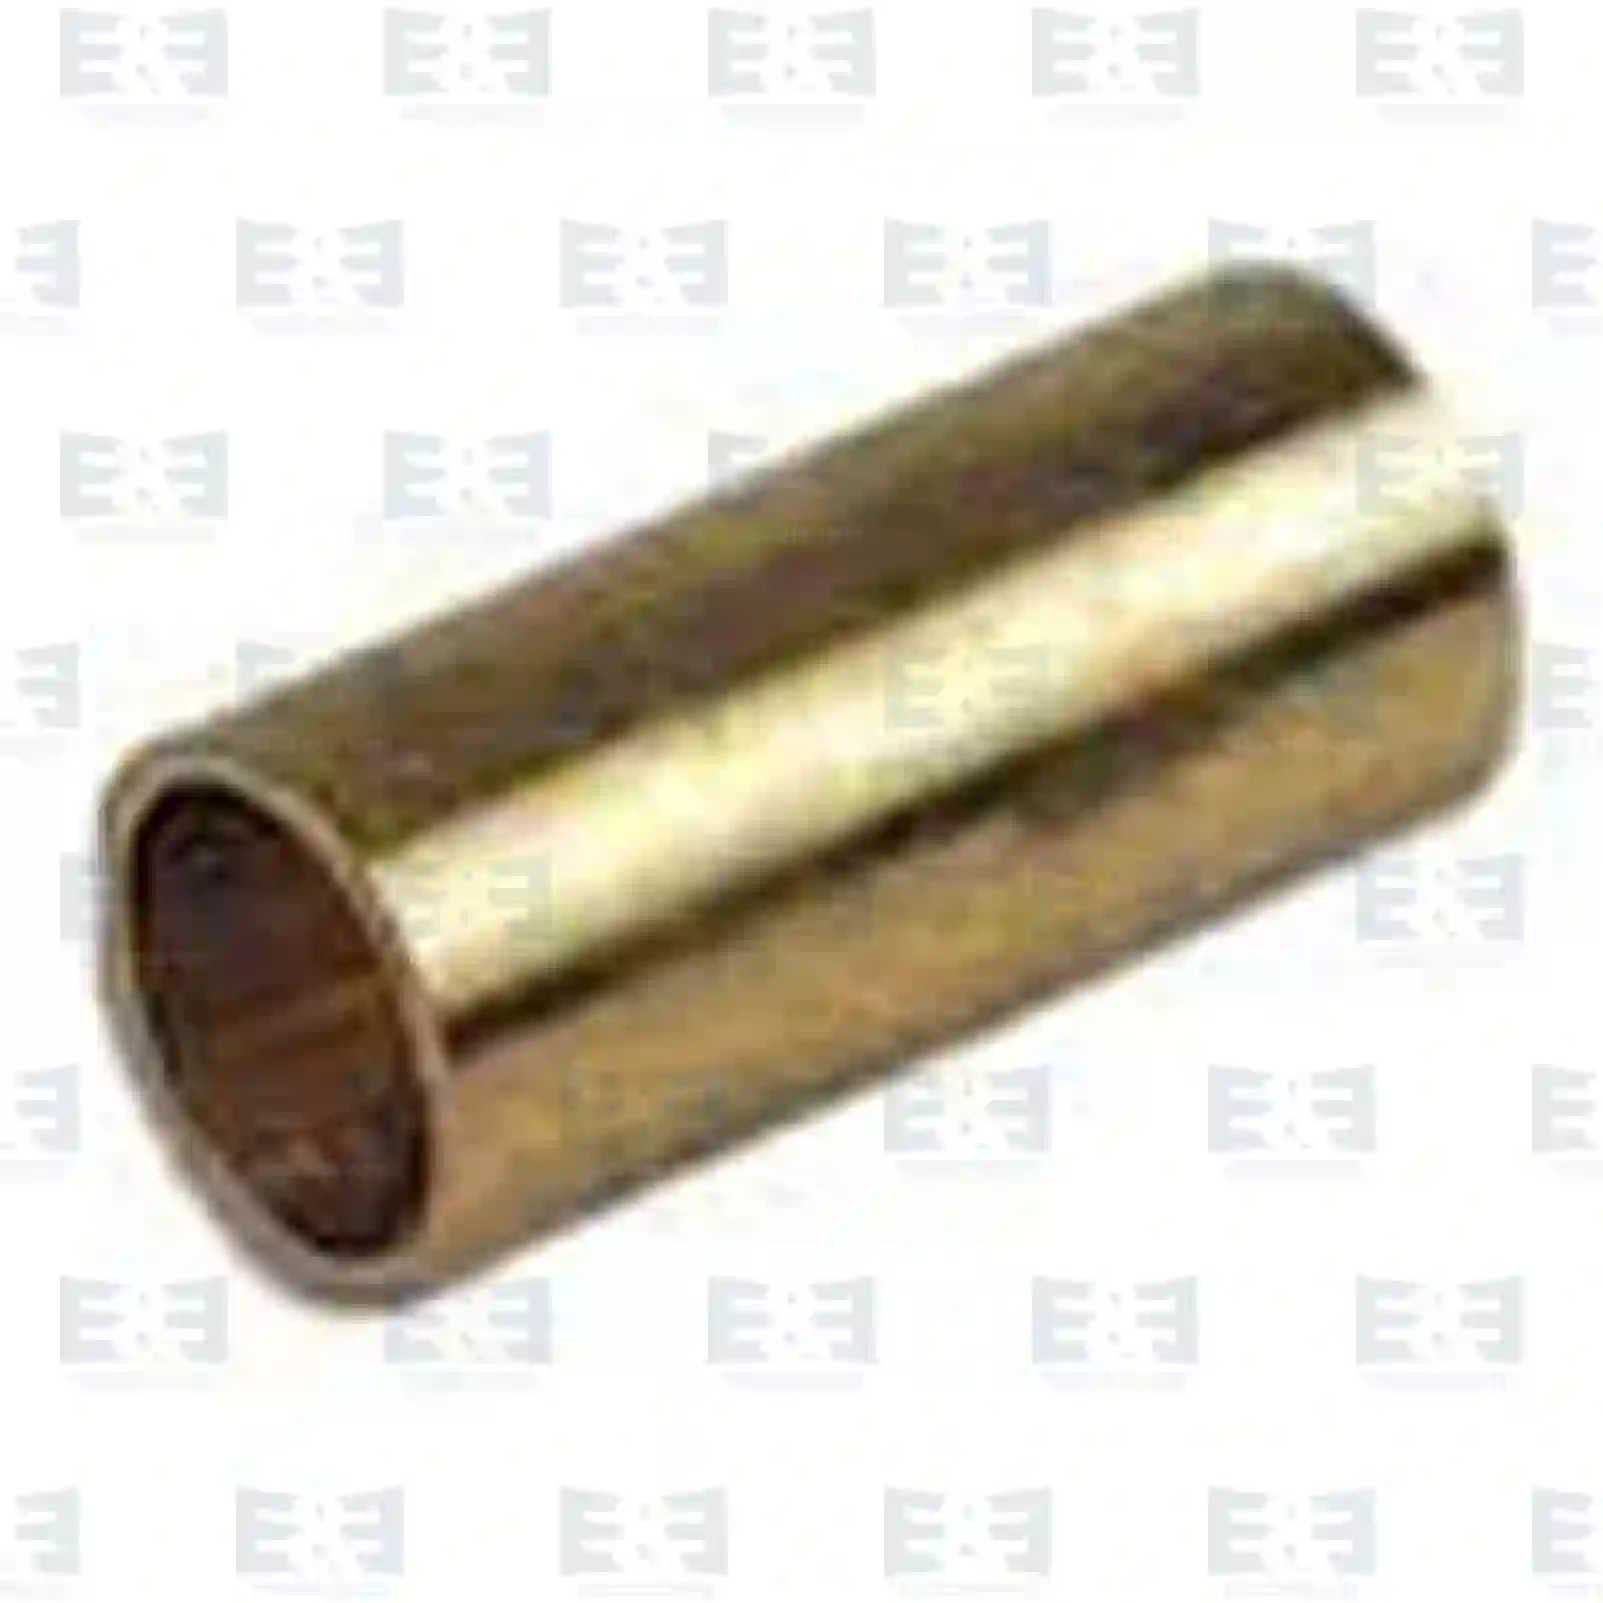 Spring Bracket Spring bushing, EE No 2E2283057 ,  oem no:3123241050, 3123241250, 3273225050, 3523220050, 3853220050 E&E Truck Spare Parts | Truck Spare Parts, Auotomotive Spare Parts